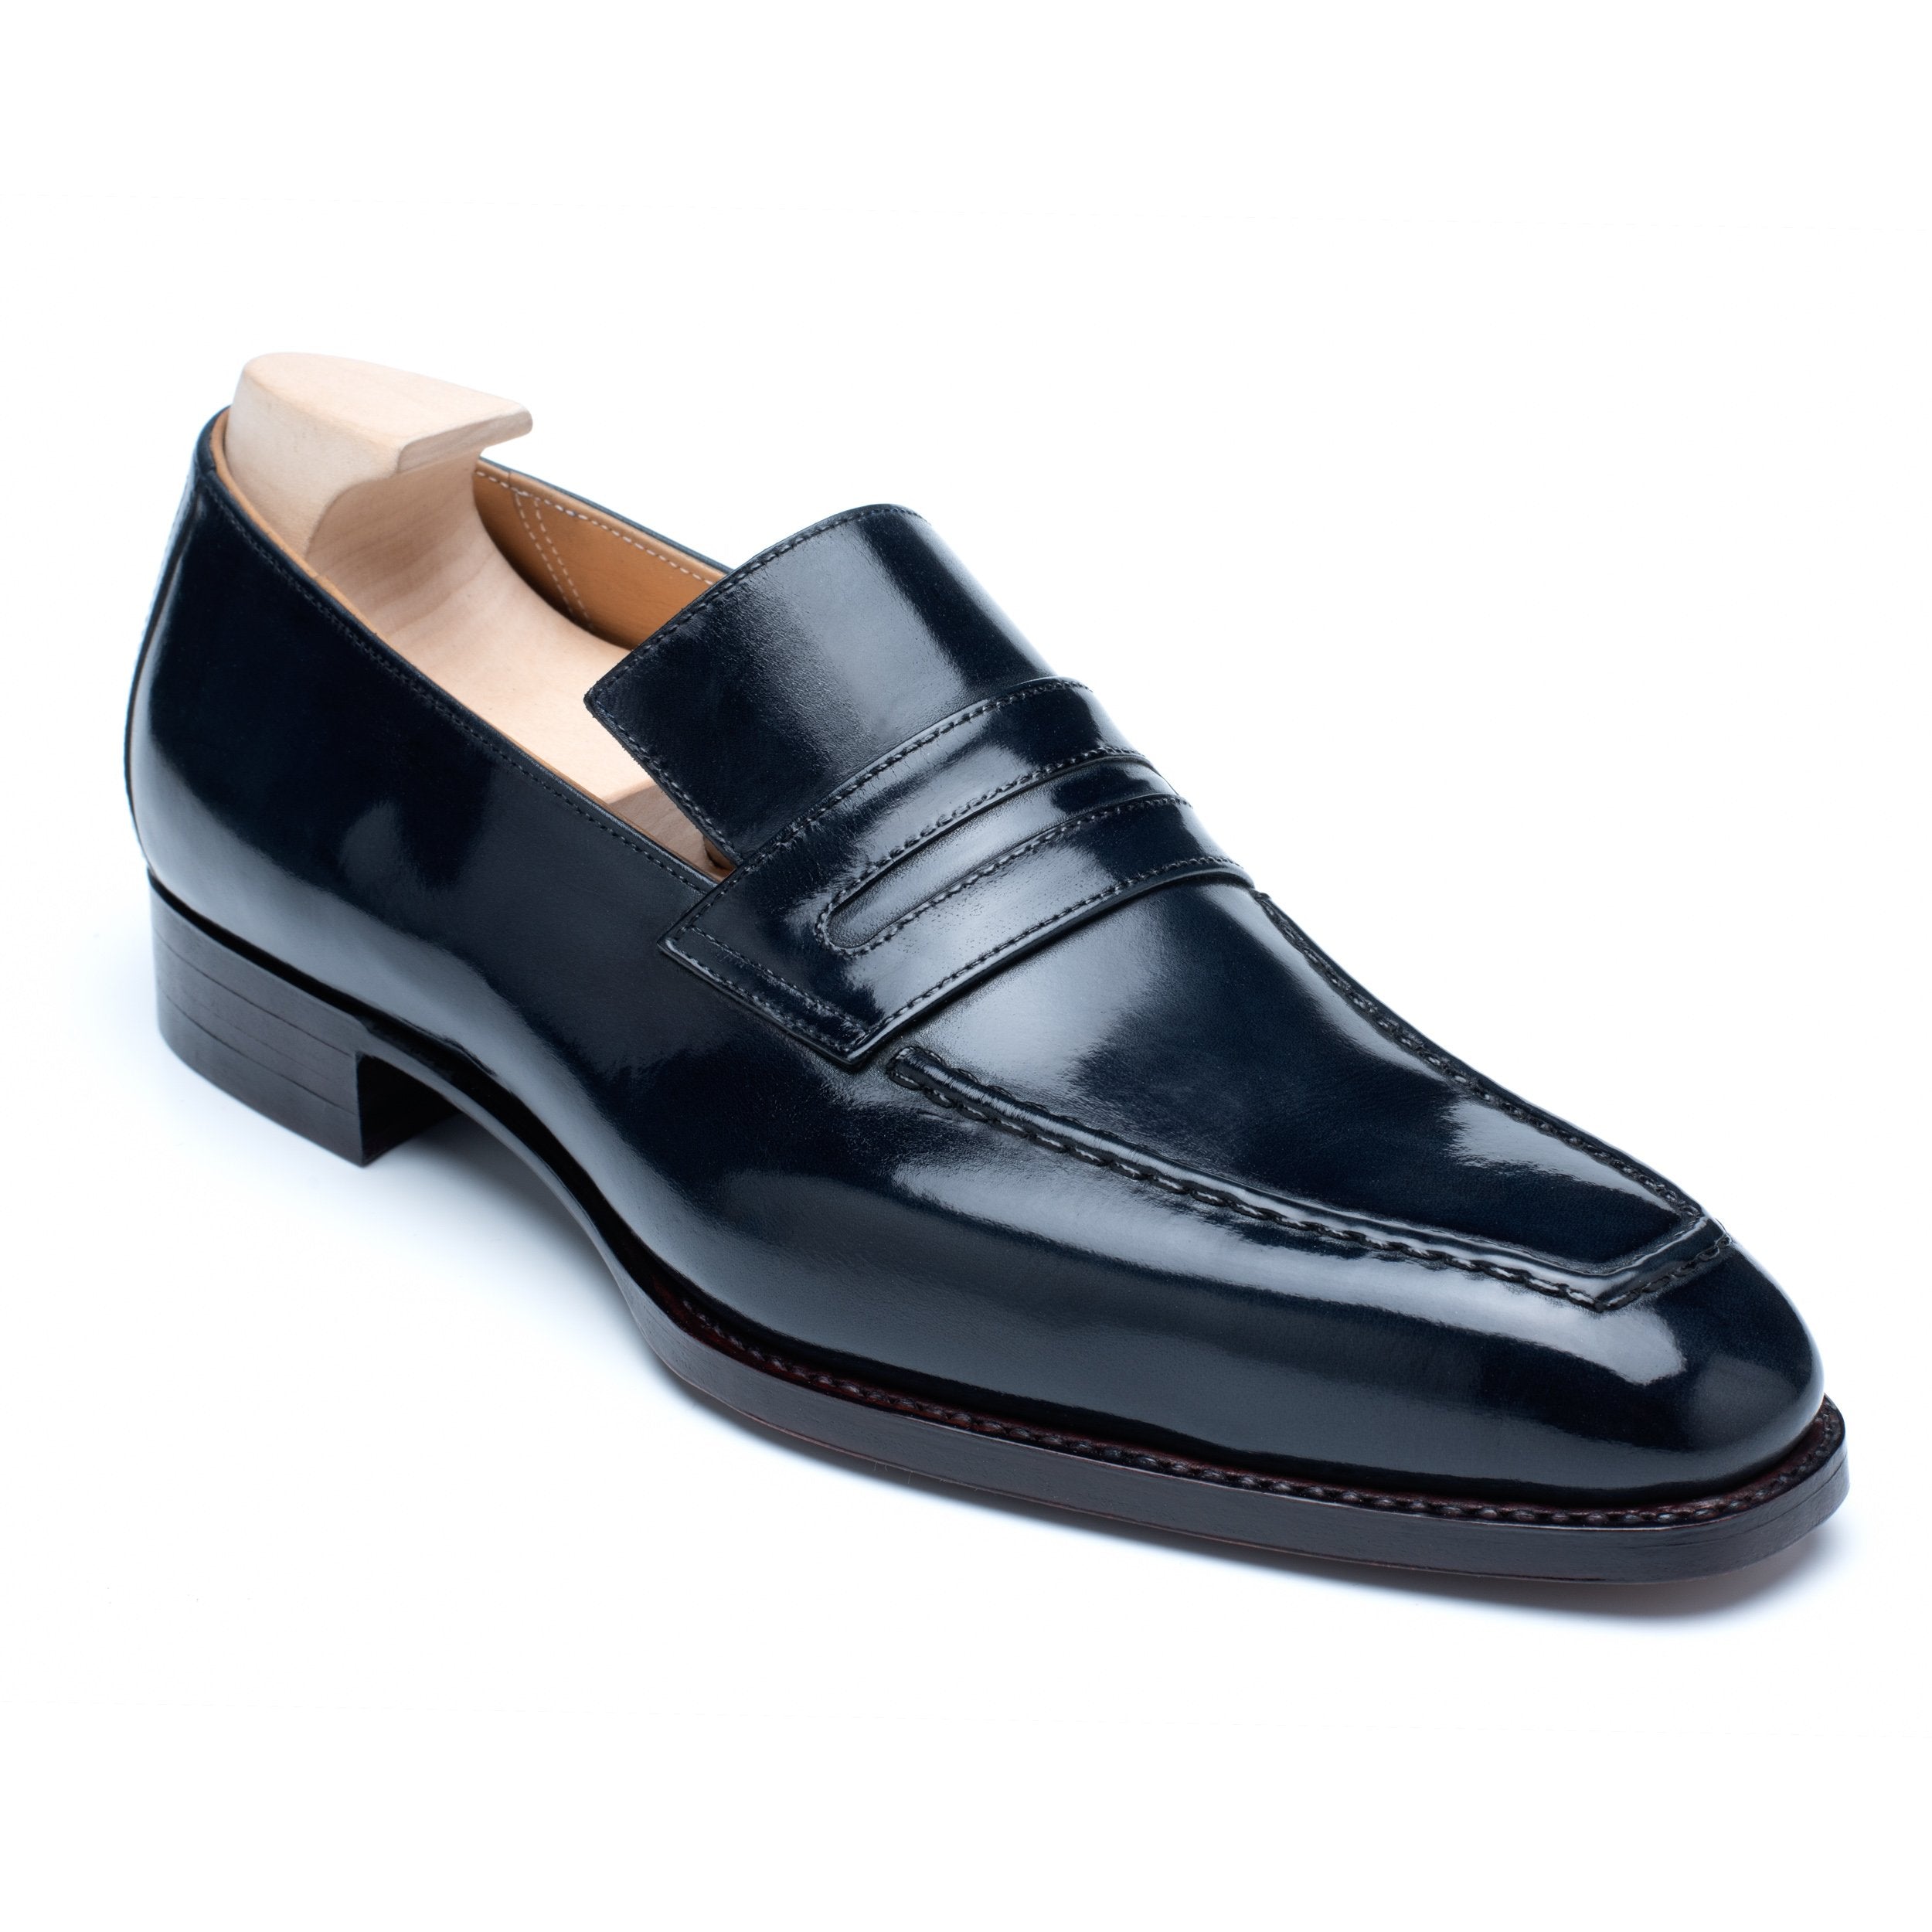 PASSUS SHOES "Anthony" Navy Blue Box Calf Leather Loafers 9 42